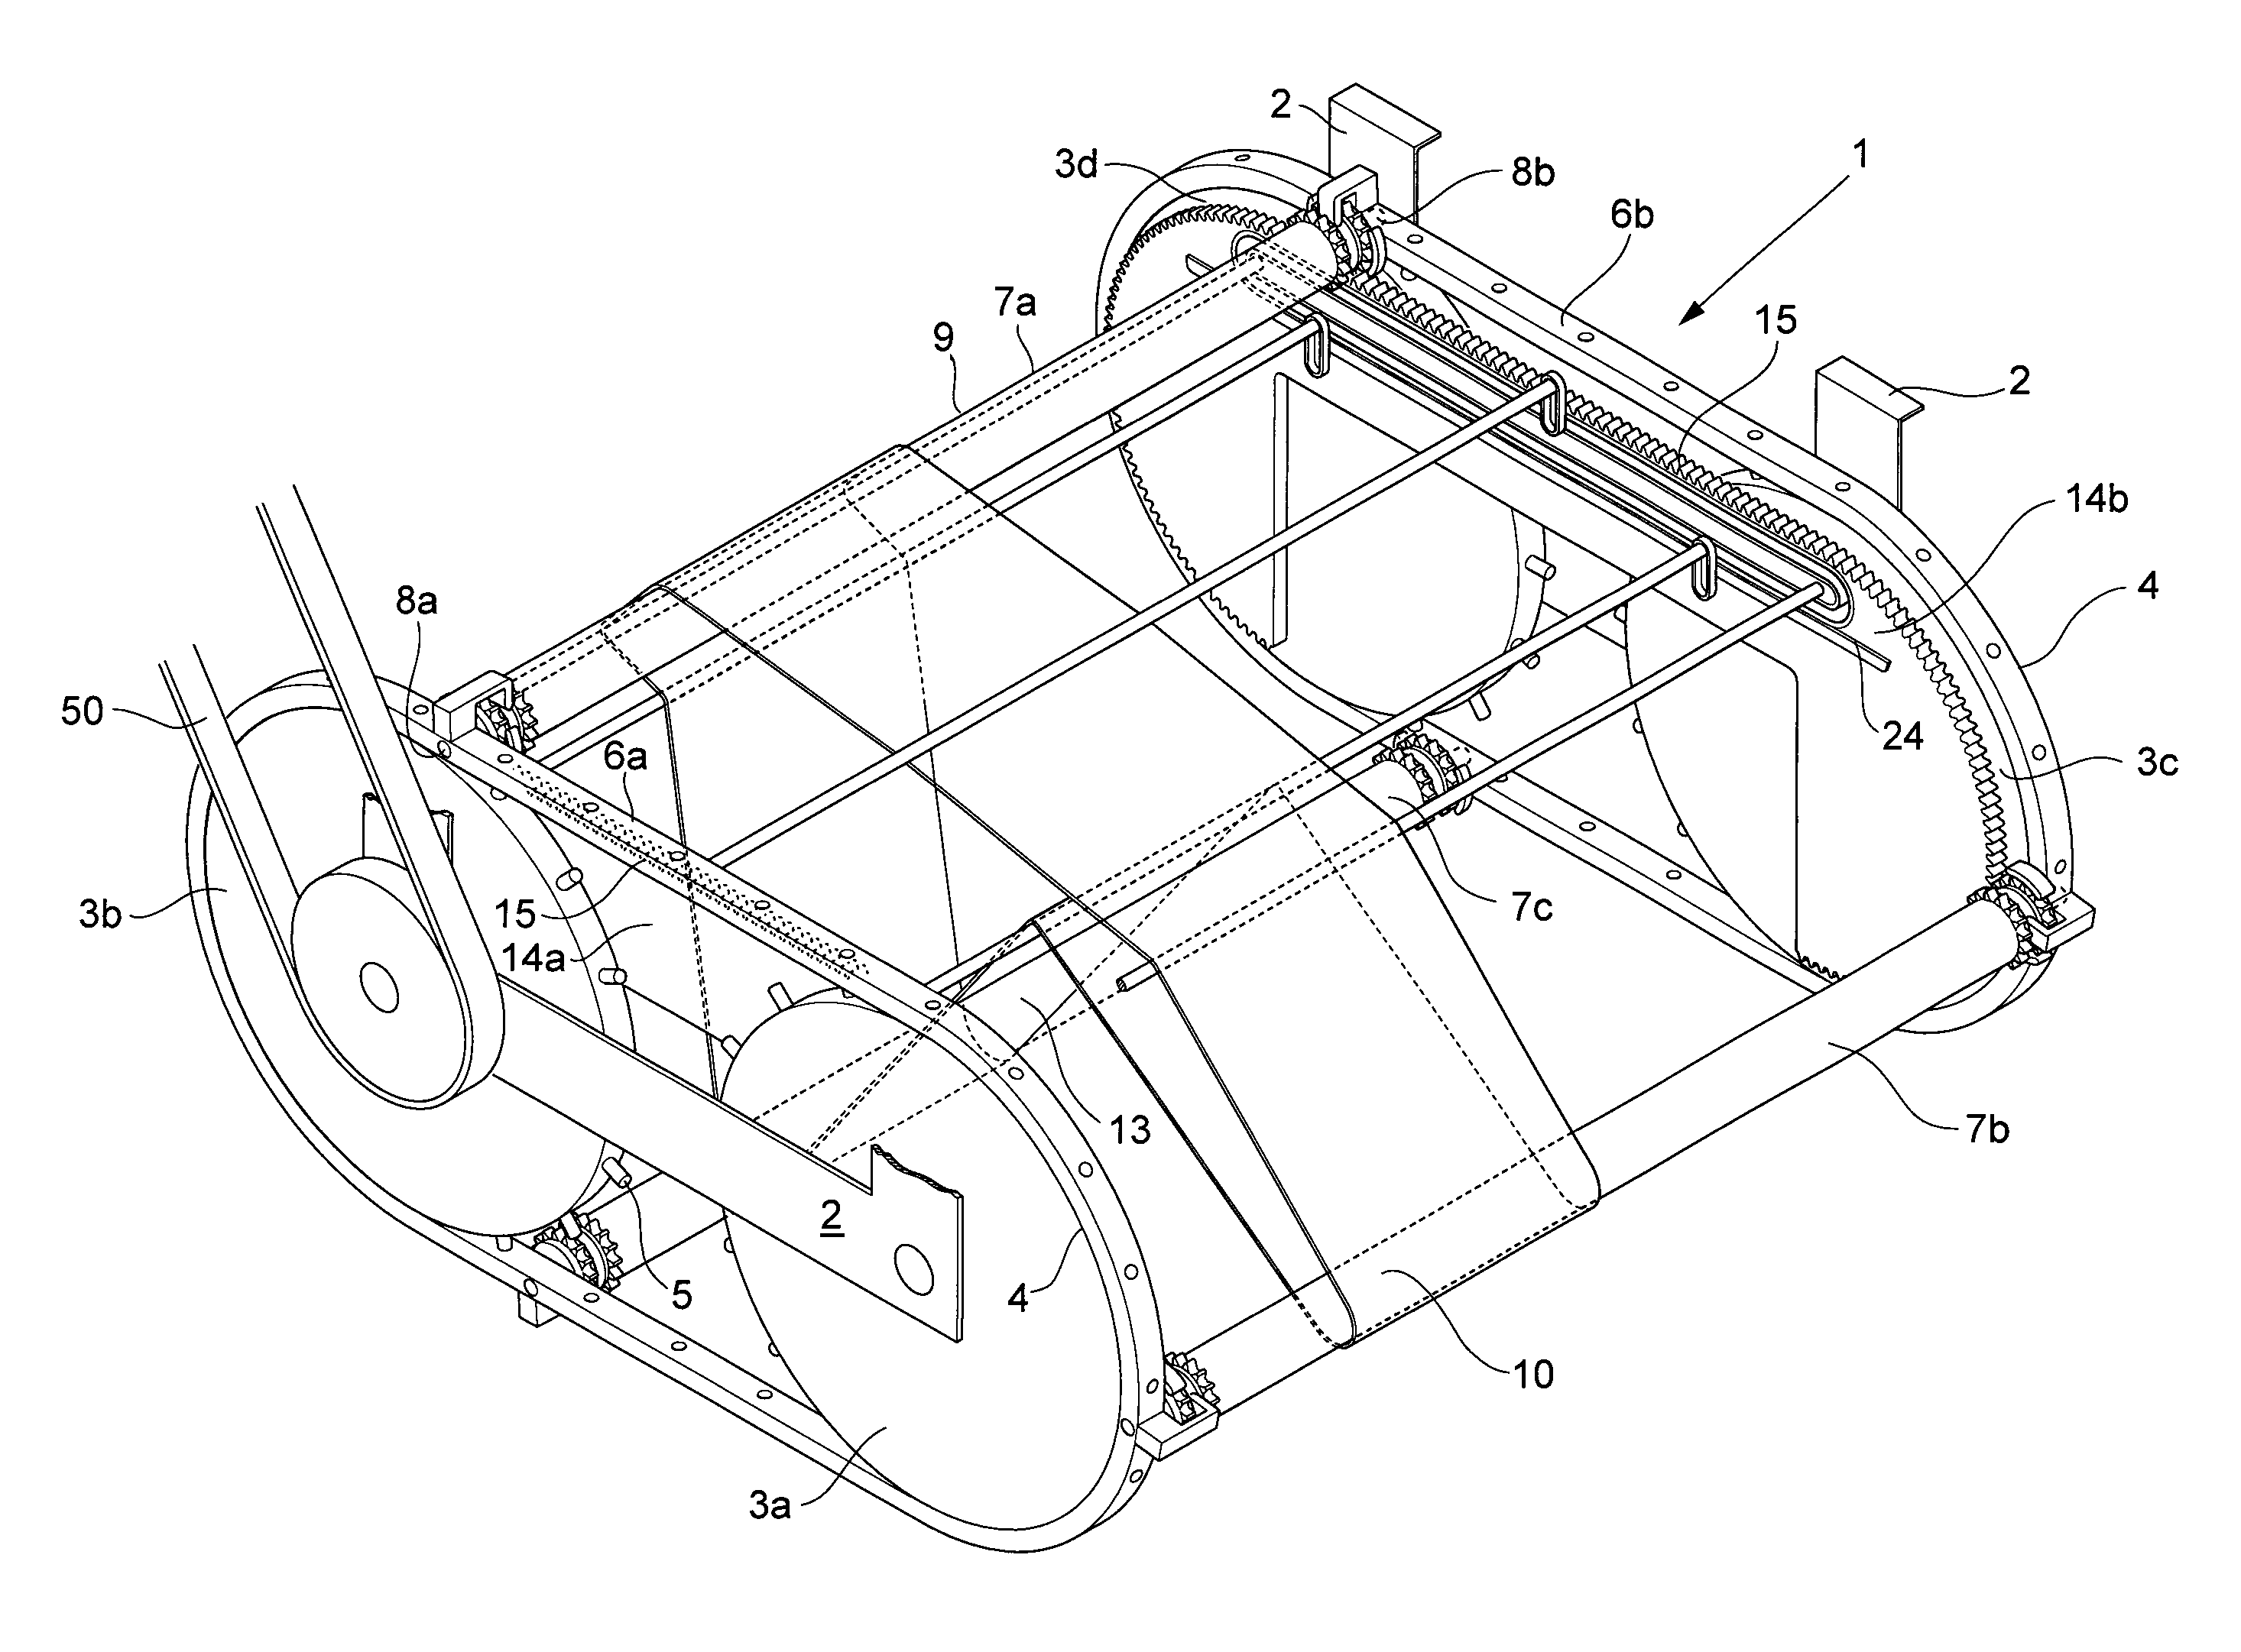 Device for boat propulsion or energy production